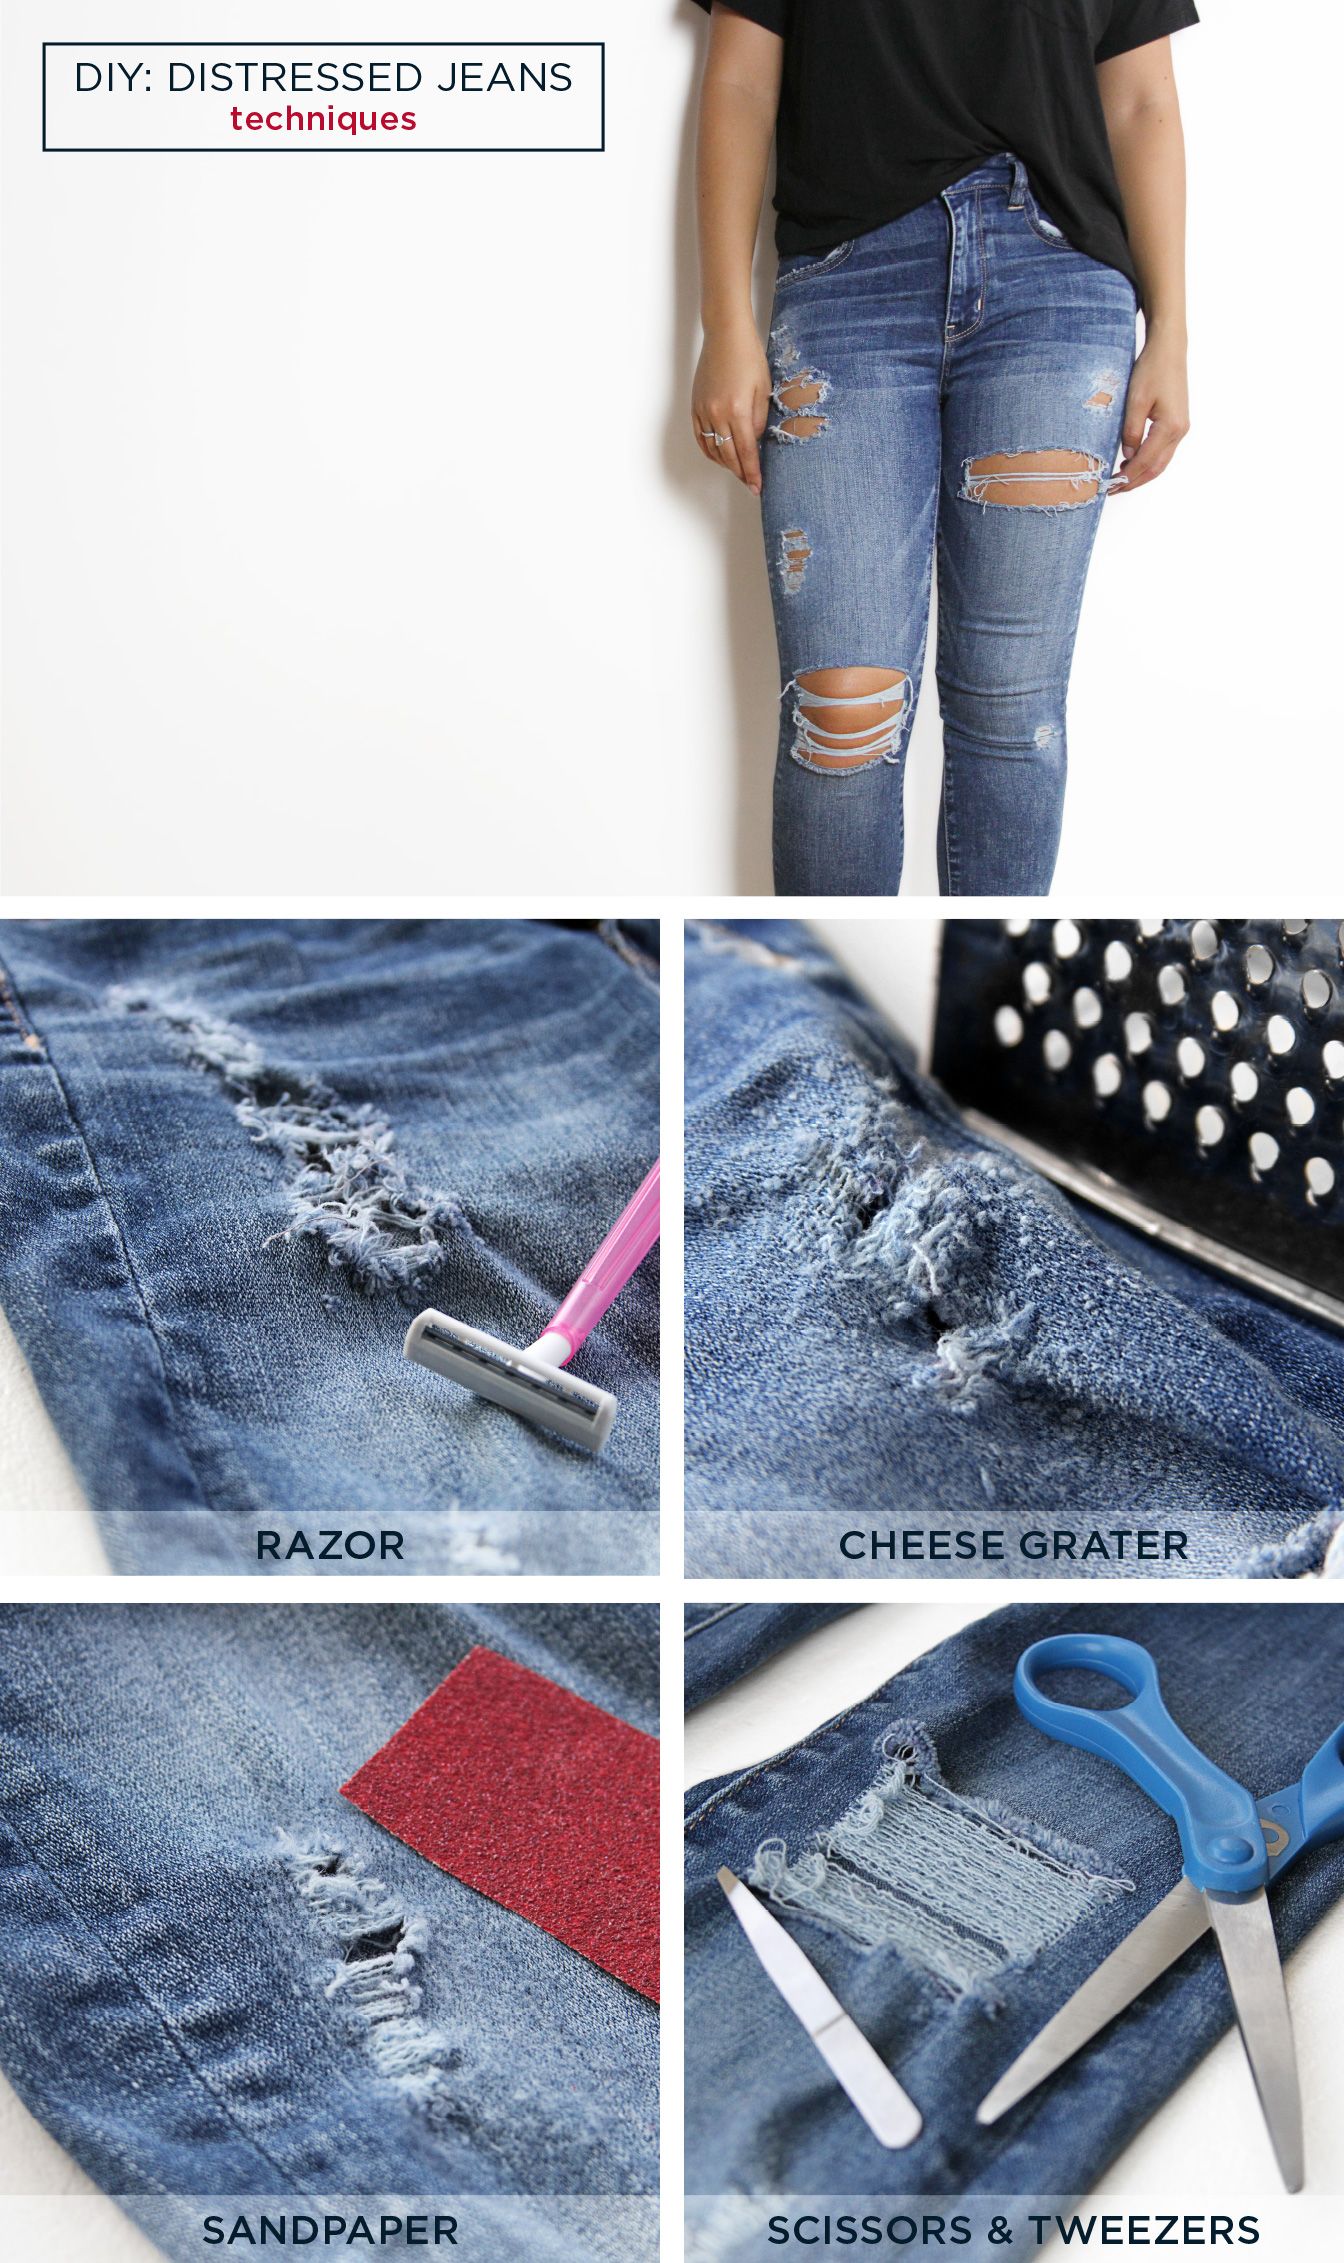 How To Make Distressed Jeans